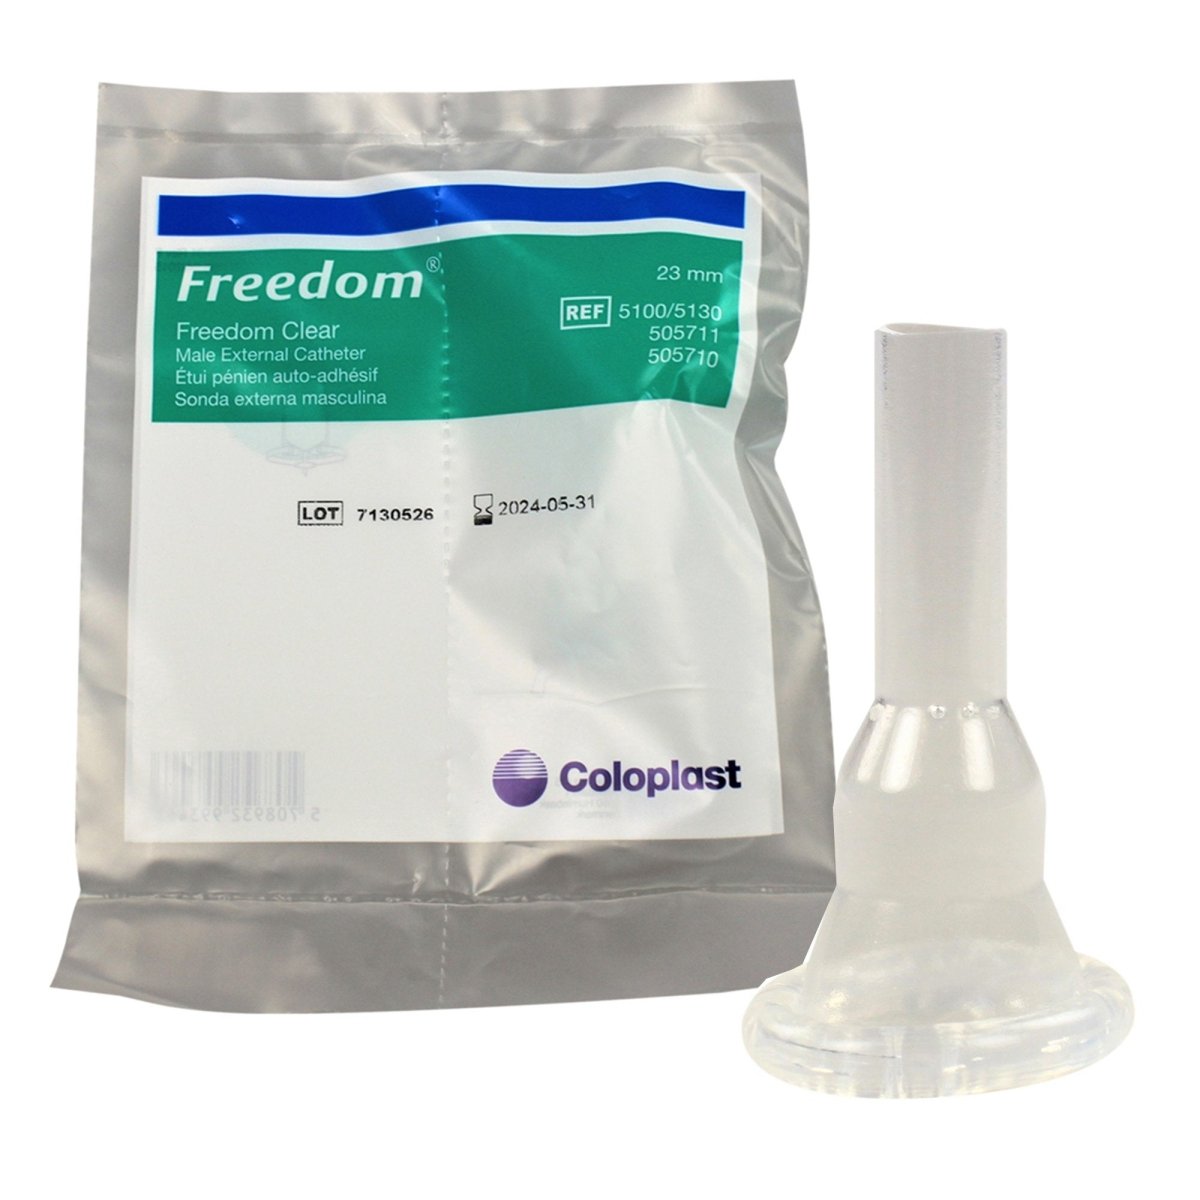 Coloplast Freedom Clear Male External Catheter